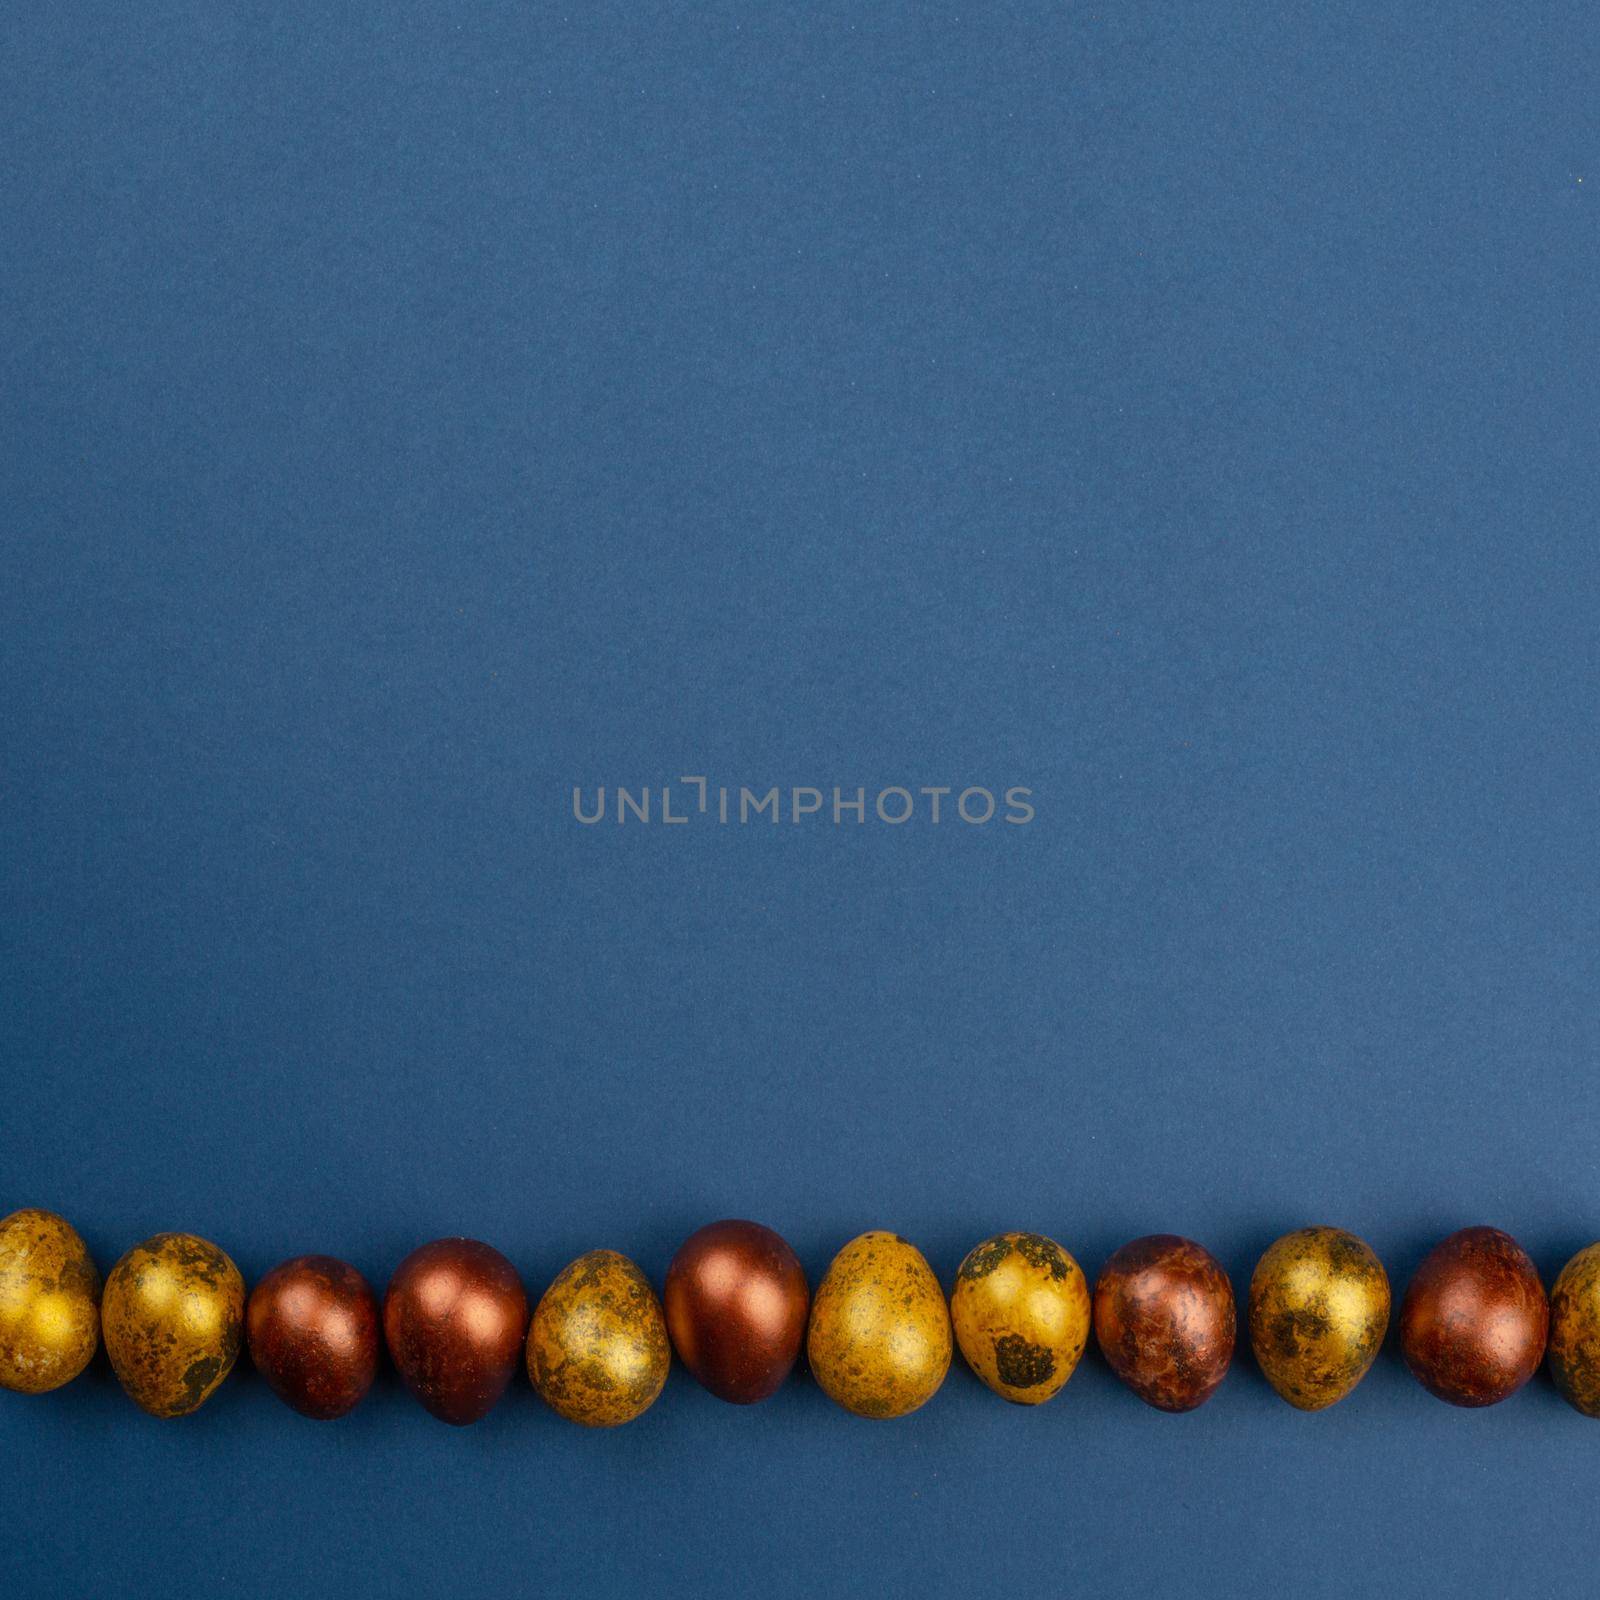 Small golden quail easter eggs in a row on blue background copy space for text